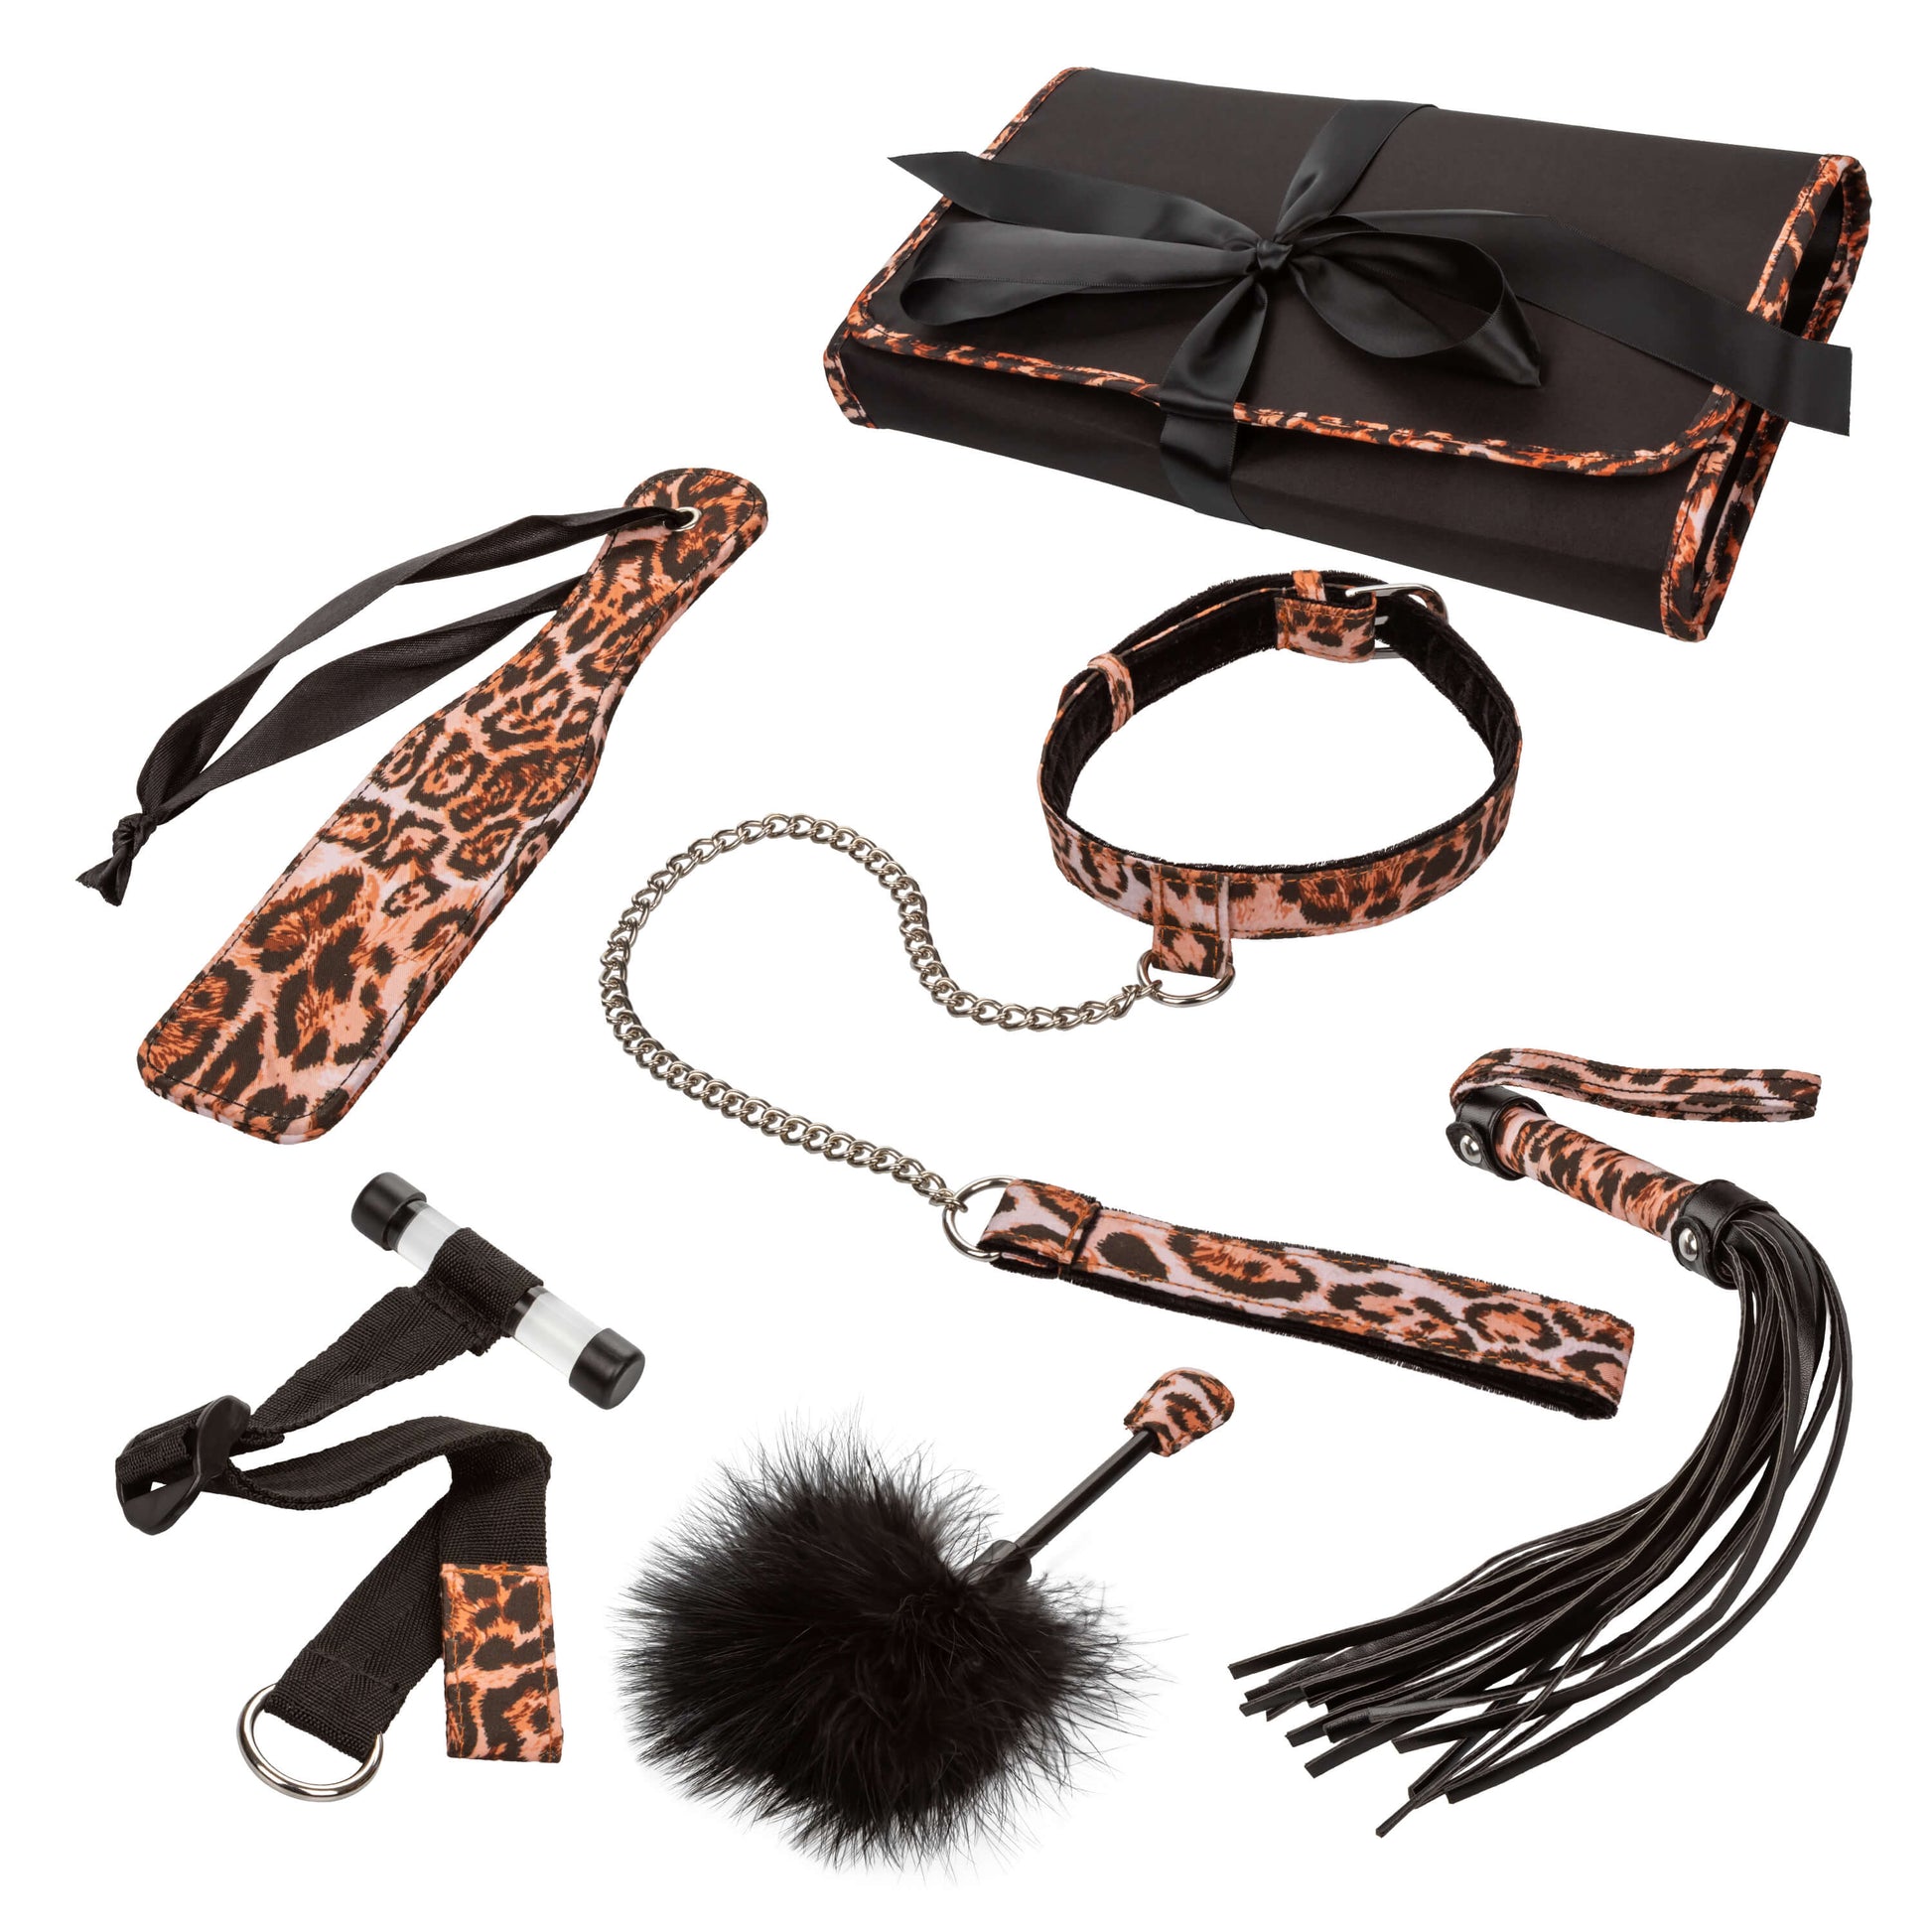 BDSM Unleashed Adventure Set CalExotics - The Bigger O - online sex toy shop USA, Canada & UK shipping available